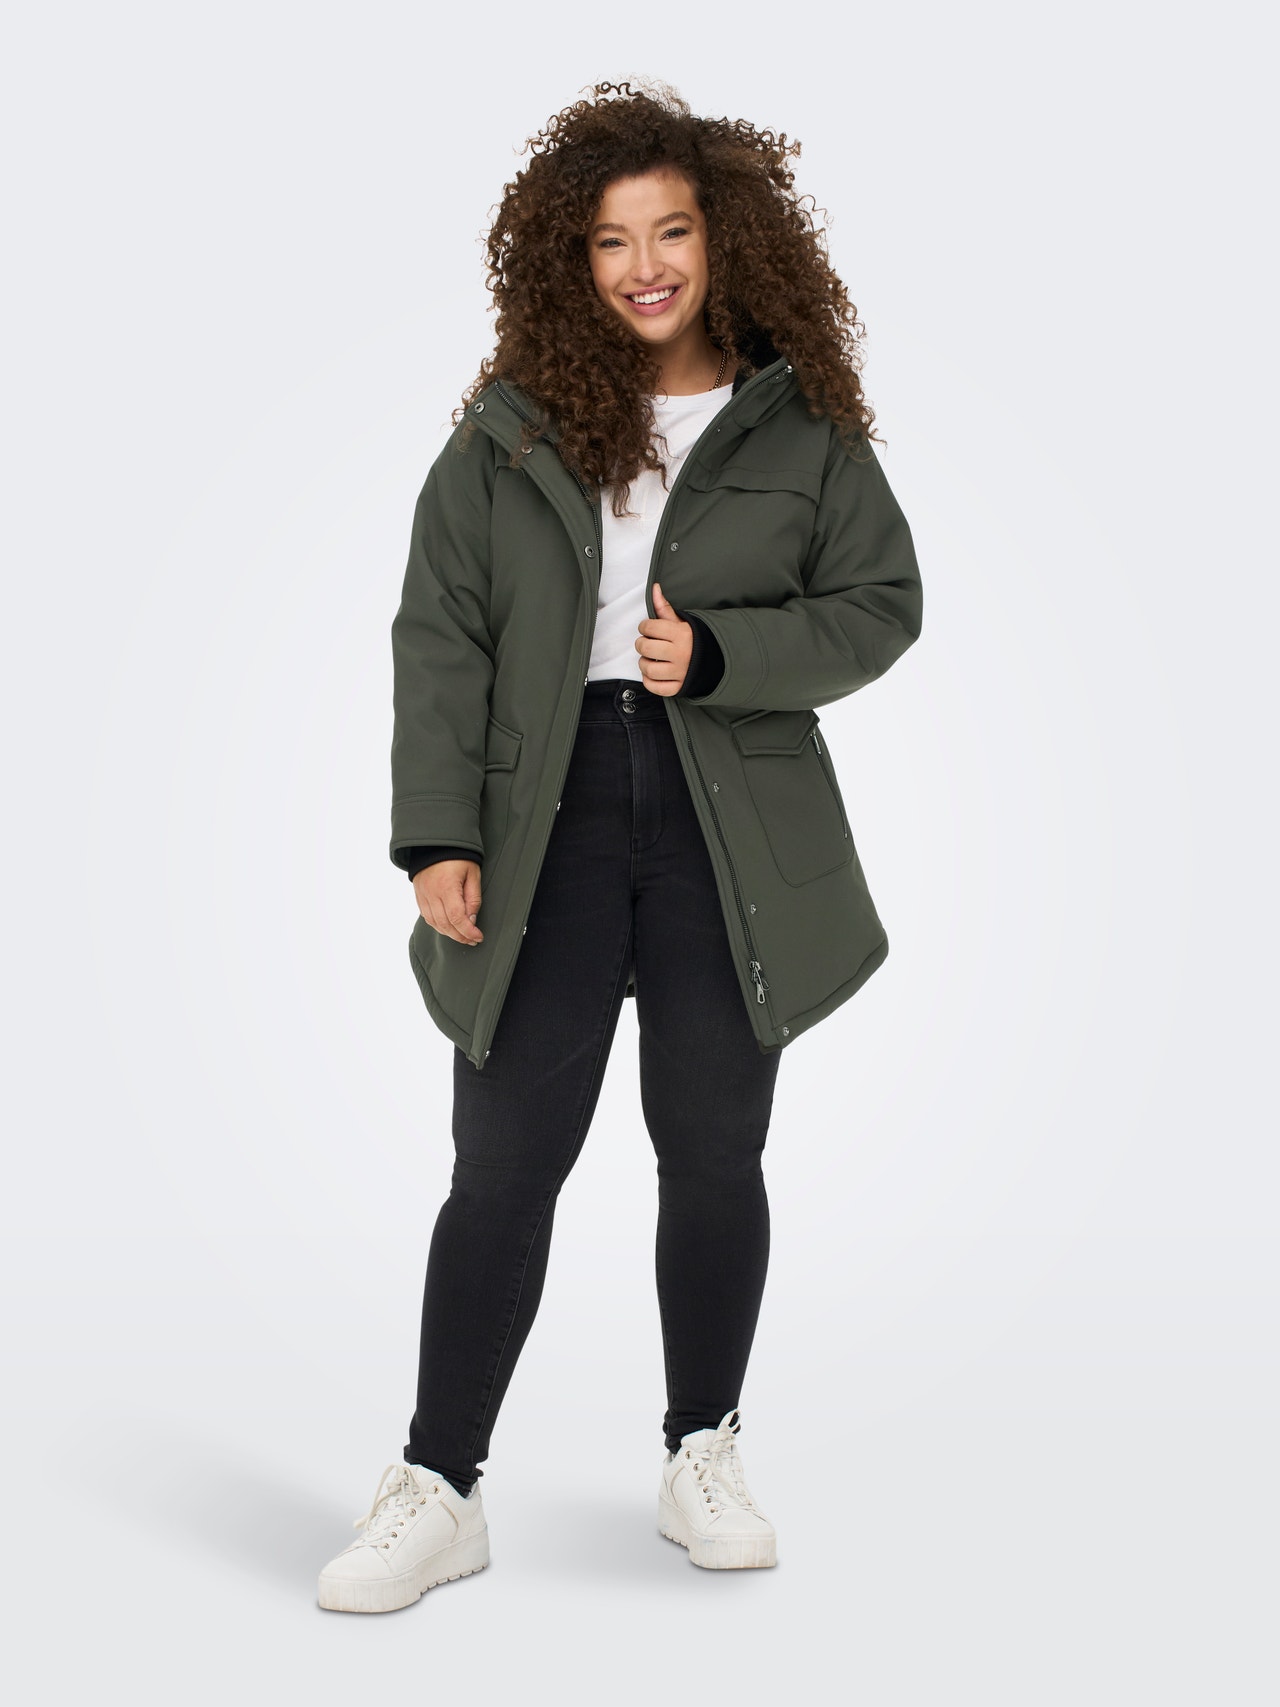 ONLY Curvy Parka -Peat - 15263136